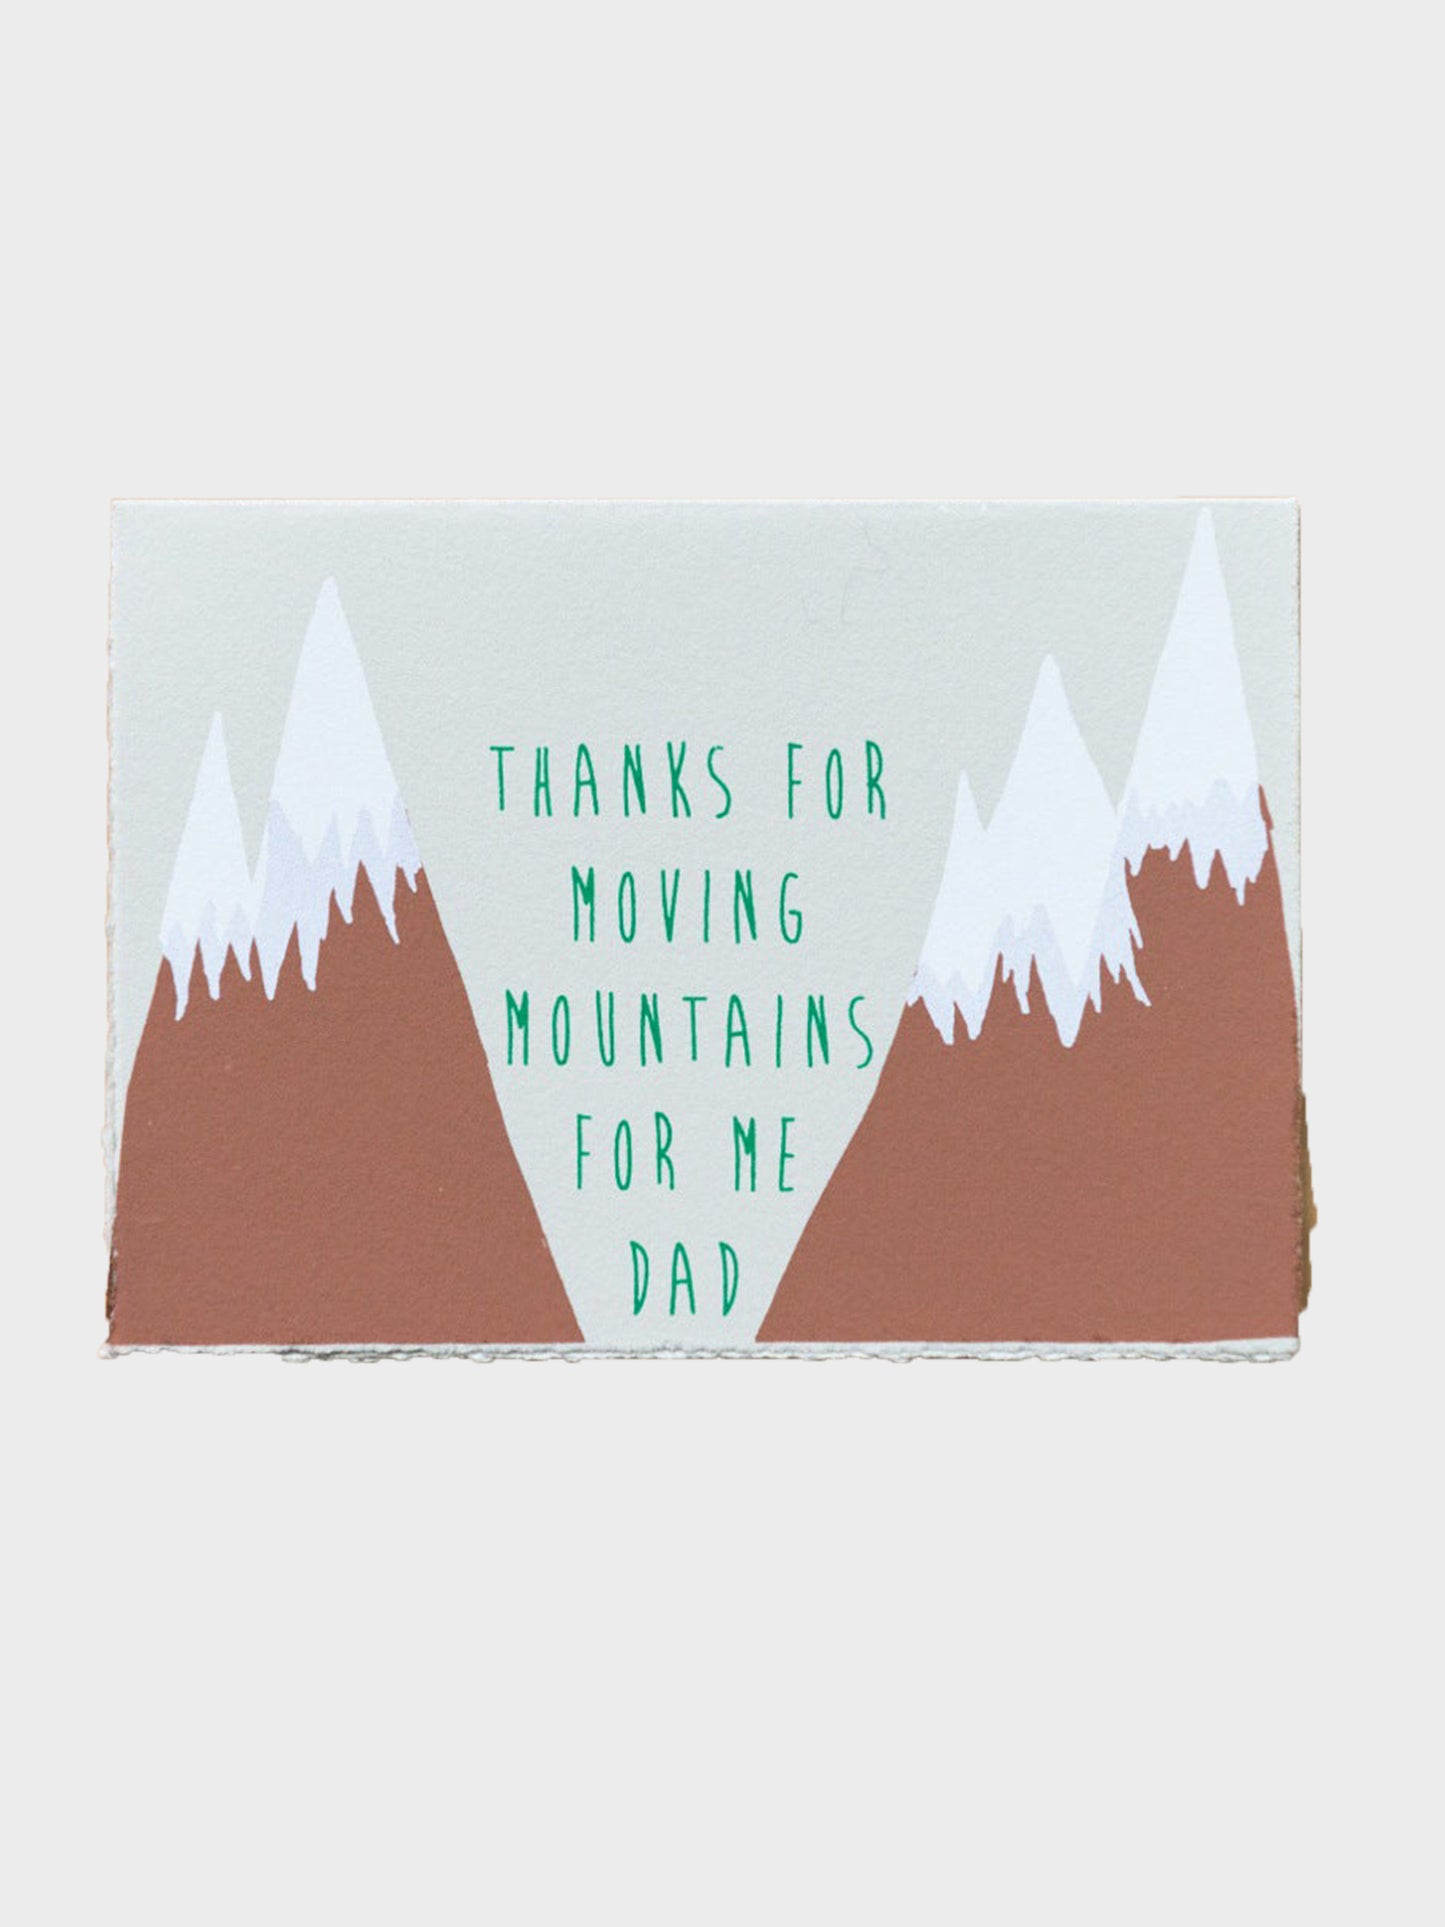 Gold Teeth Brooklyn Thanks For Moving Mountains Dad Greeting Card